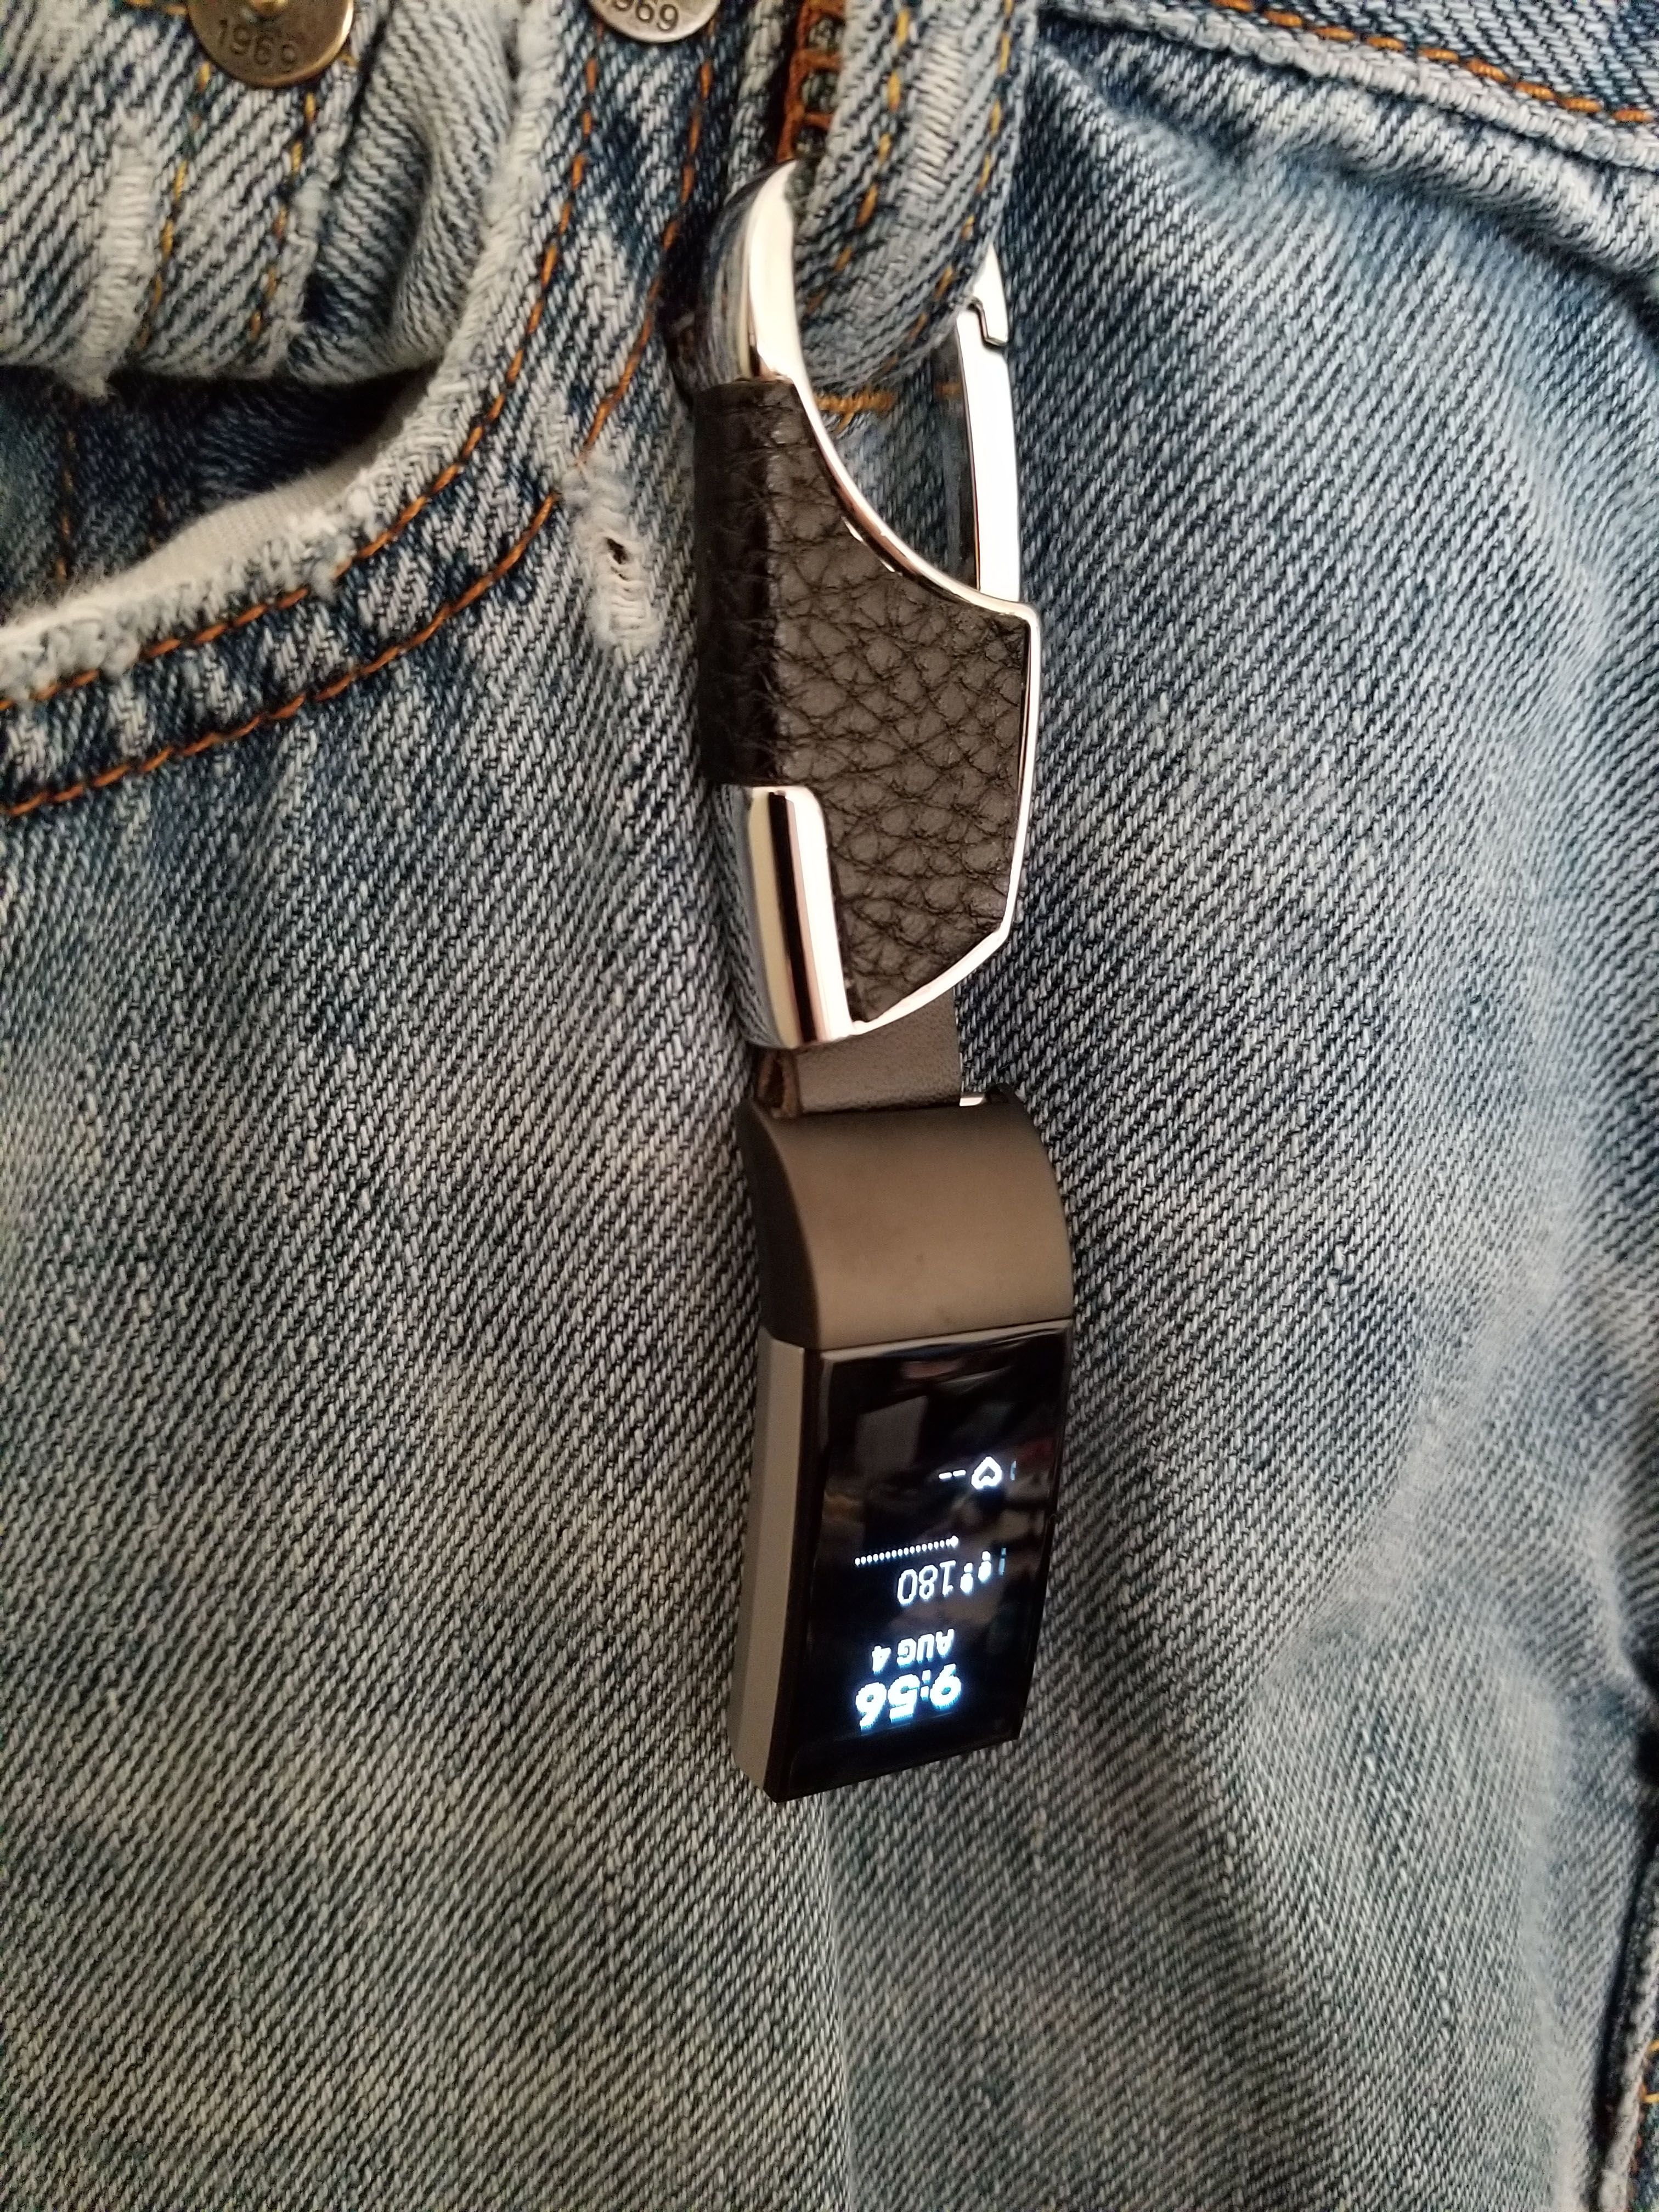 fitbit fob watch holder